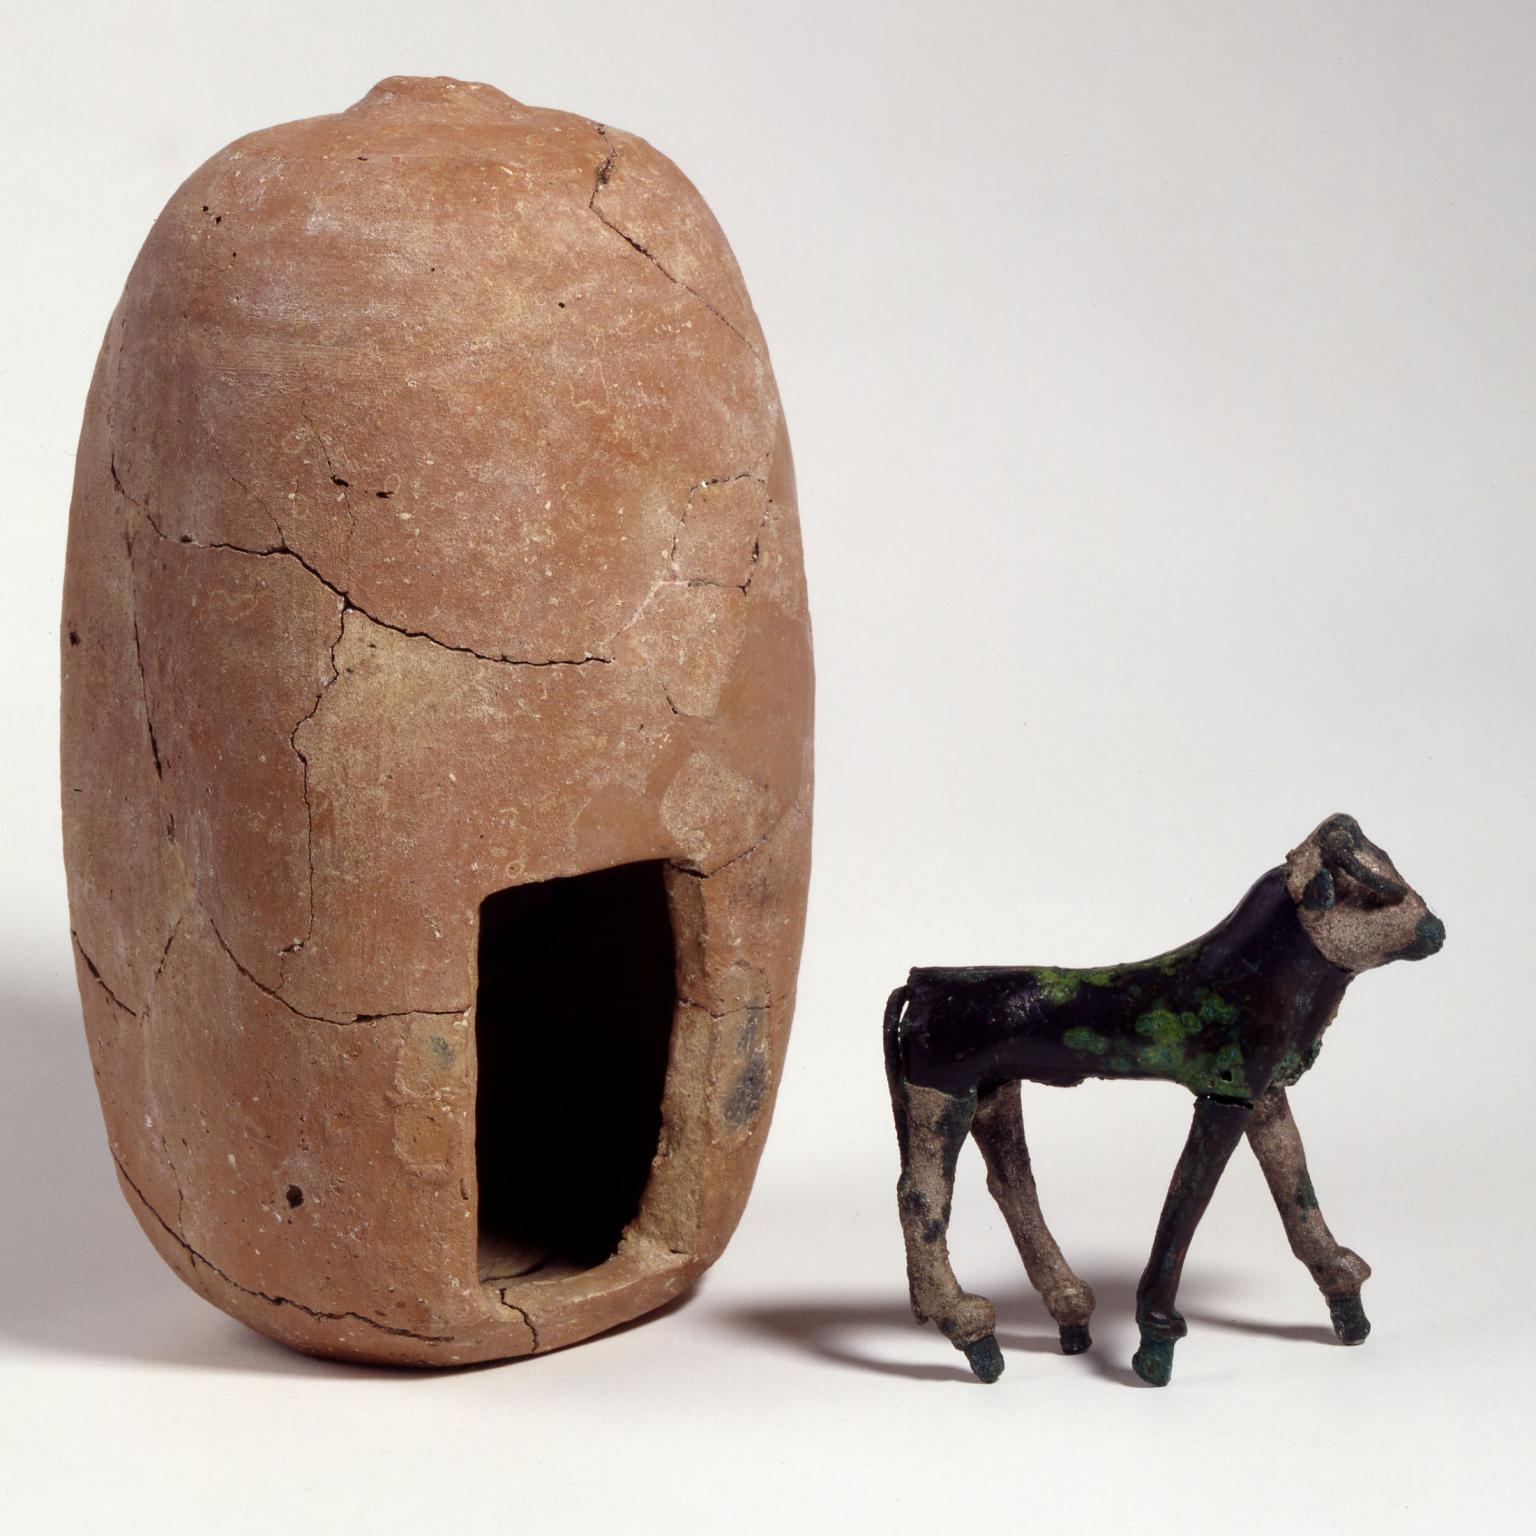 Silver calf figurine next to upright clay building with entrance.